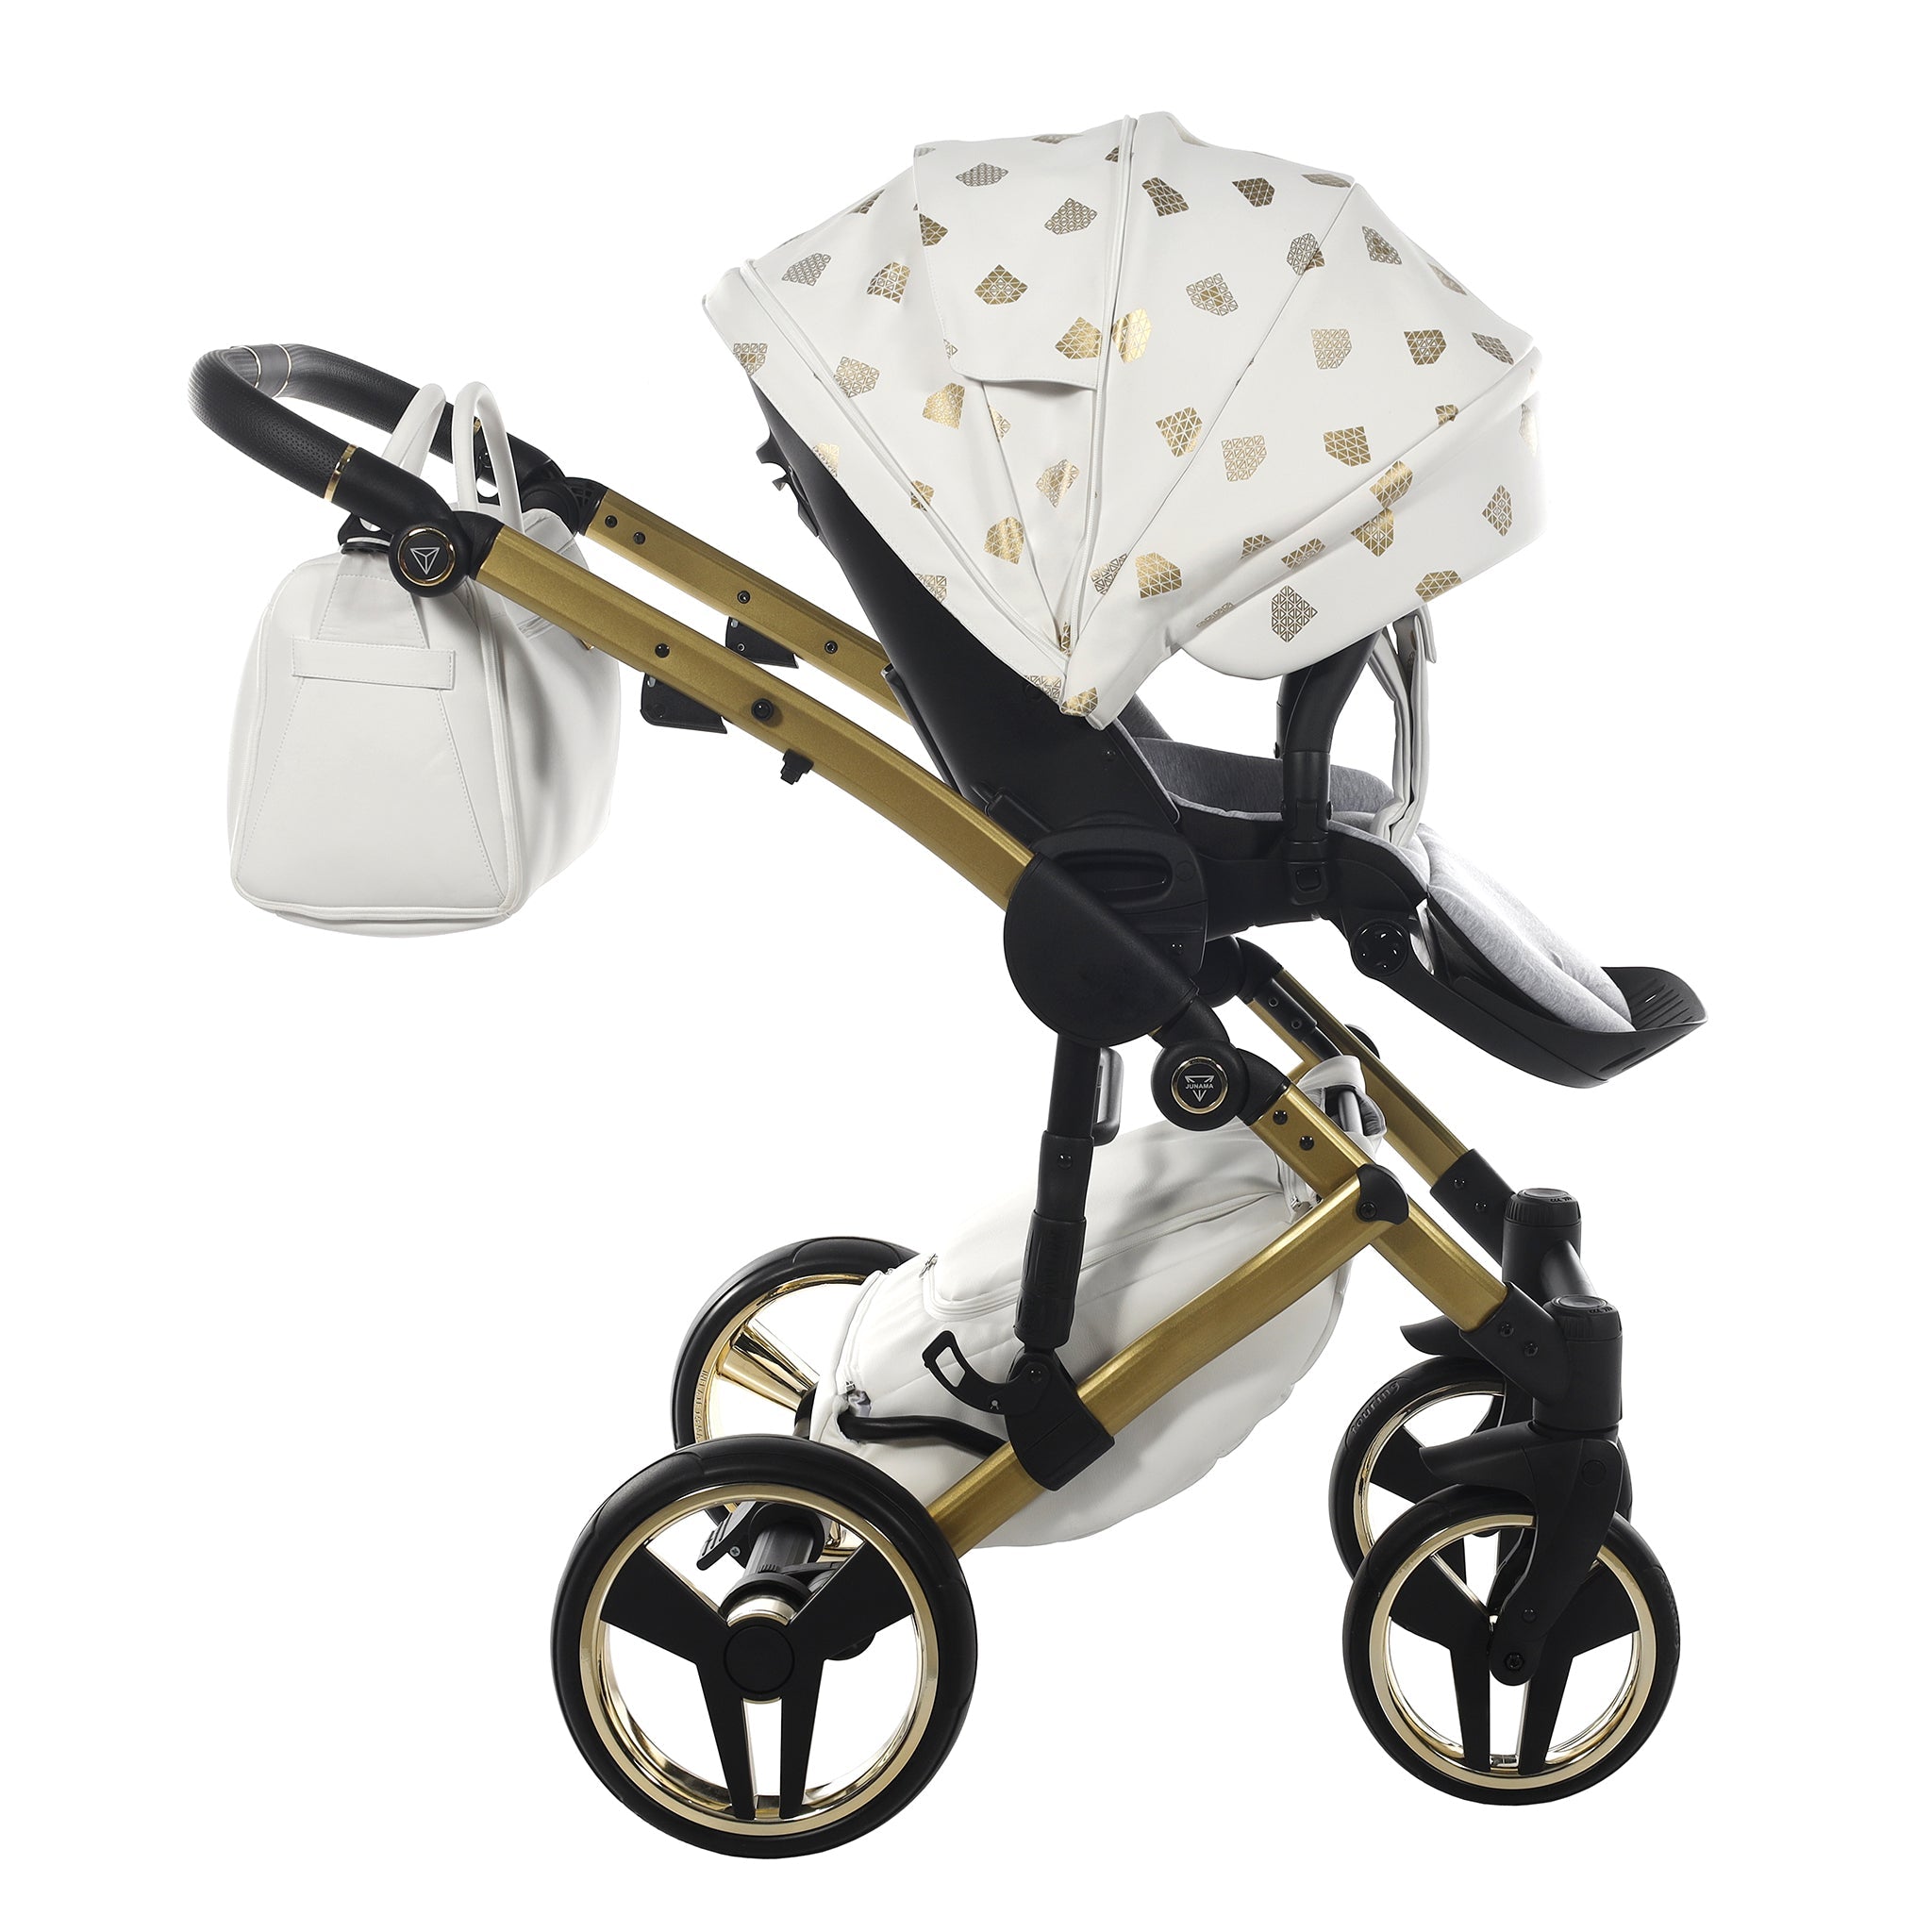 Junama GLOW, baby prams or stroller 2 in 1 - Gold and White, Code number: JUNGLW02